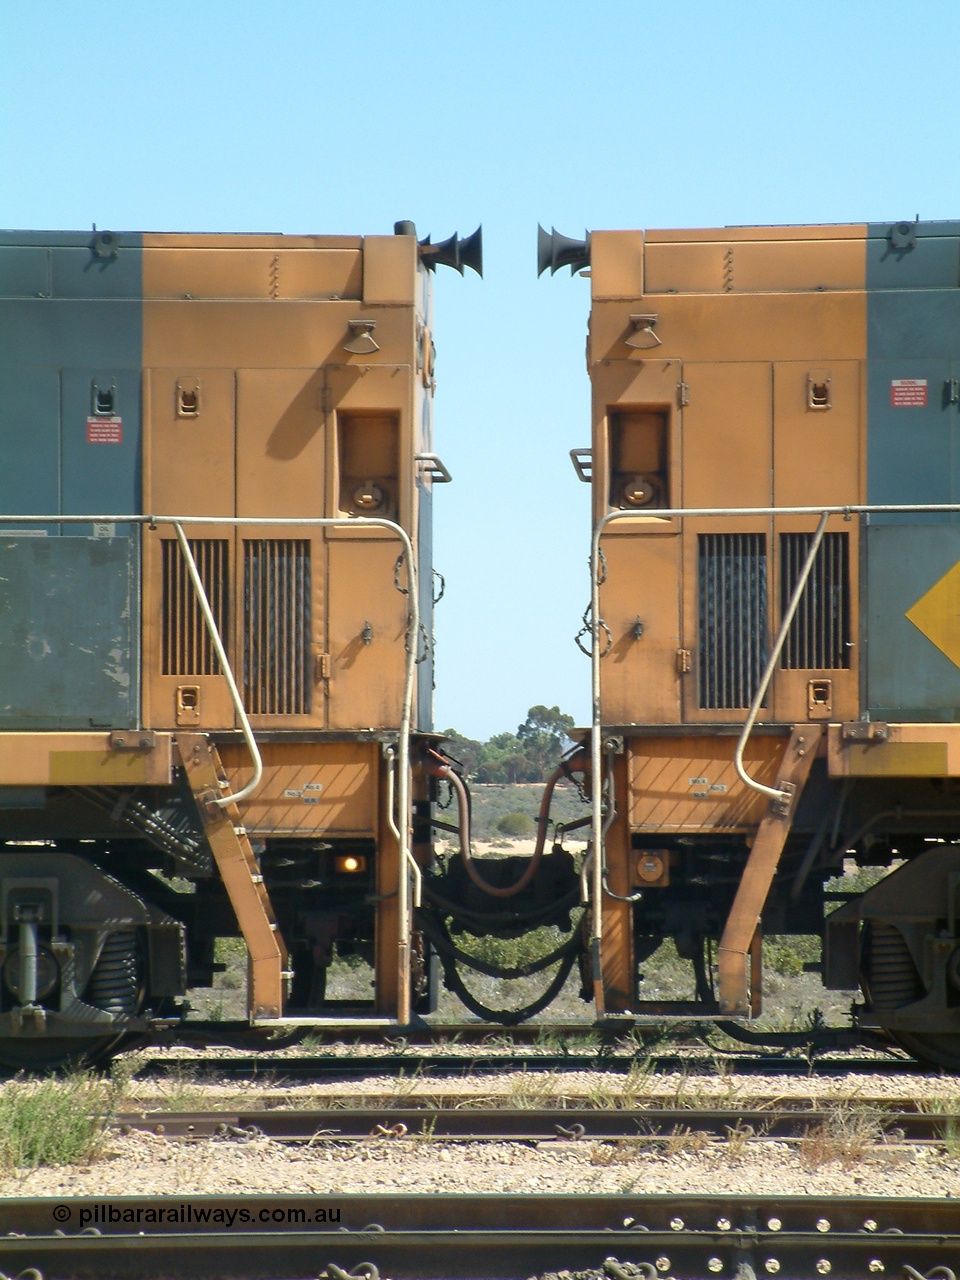 030404 125227
Port Augusta Spencer Junction yard, a pair of back to back National Rail NR class units built by Goninan as GE Cv40-9i models showing the coupling between two unit, NR 50 serial 7250-08 / 97-252 is on the right. 4th April 2003.
Keywords: NR-class;NR50;Goninan;GE;Cv40-9i;7250-08/97-252;